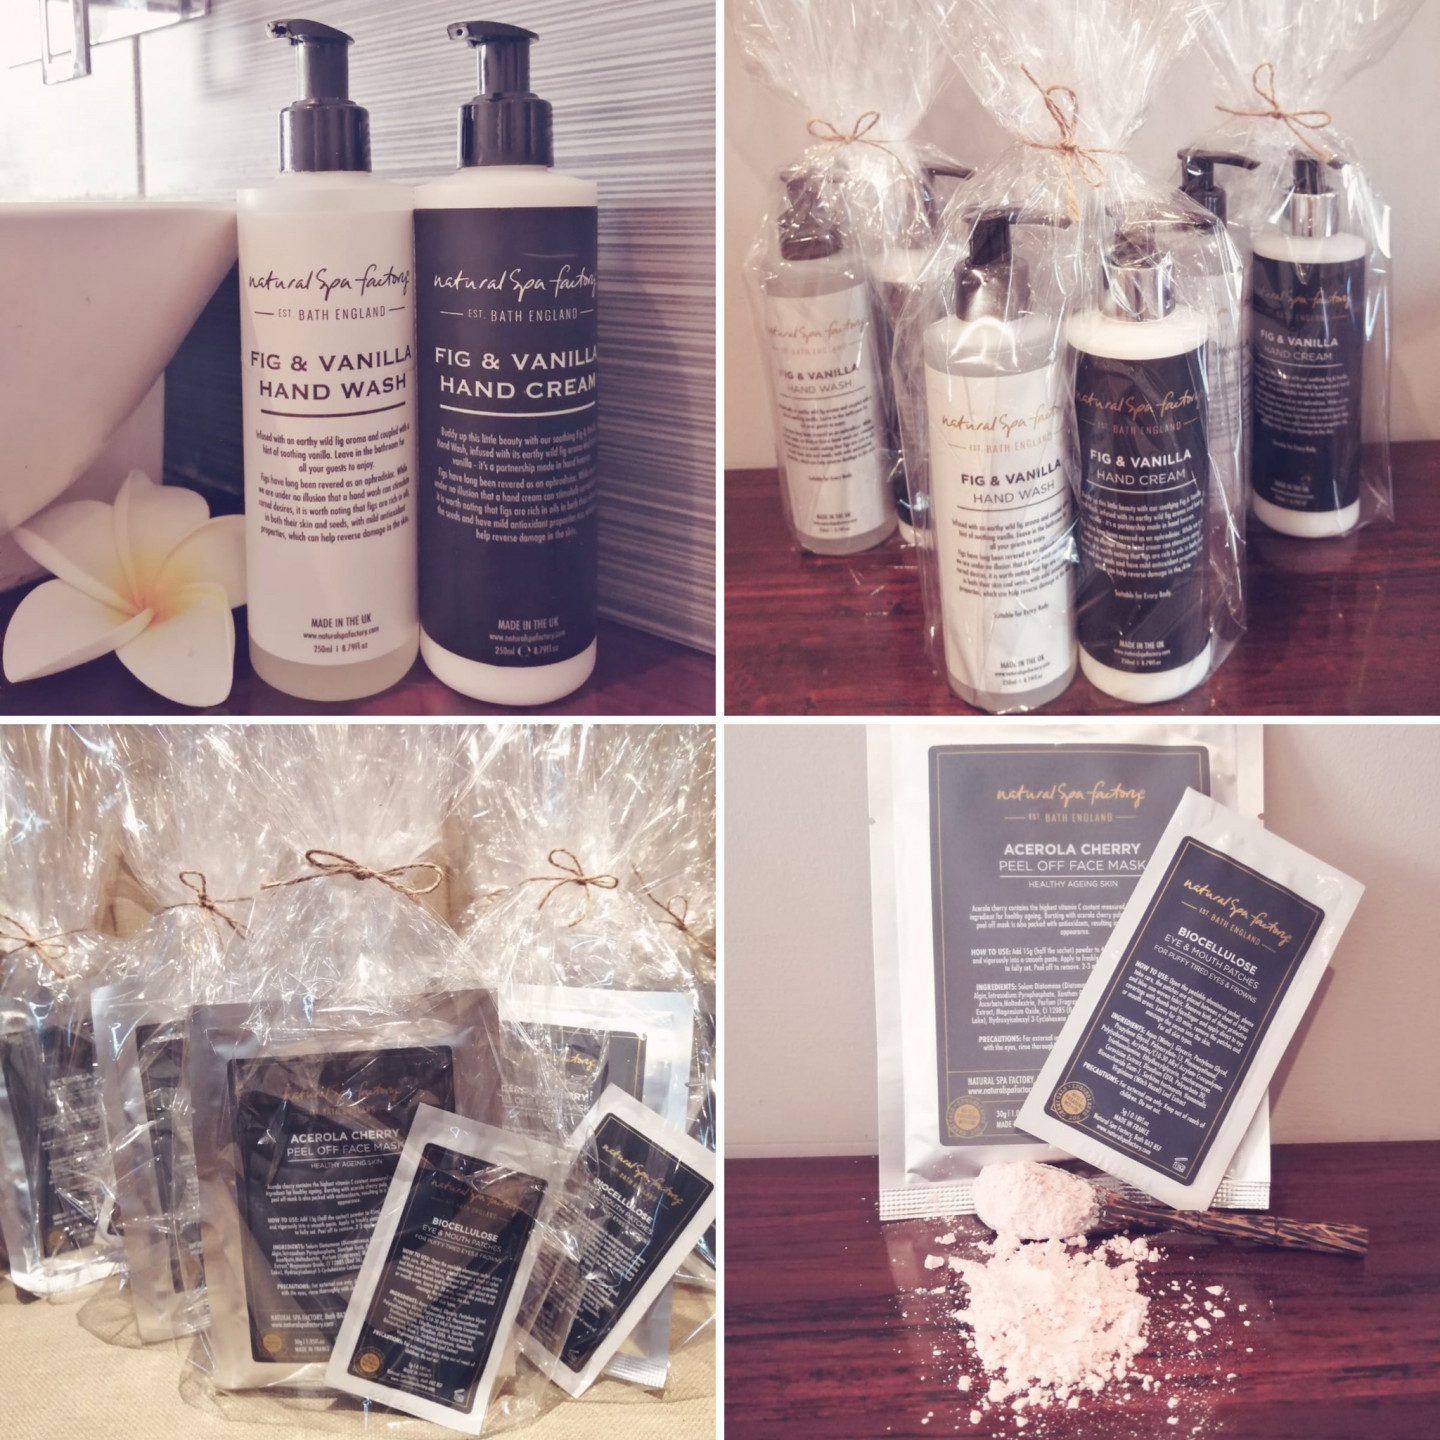 Add gorgeous Natural Spa Factory luxury skin care products to your Takeaway Afternoon Tea order